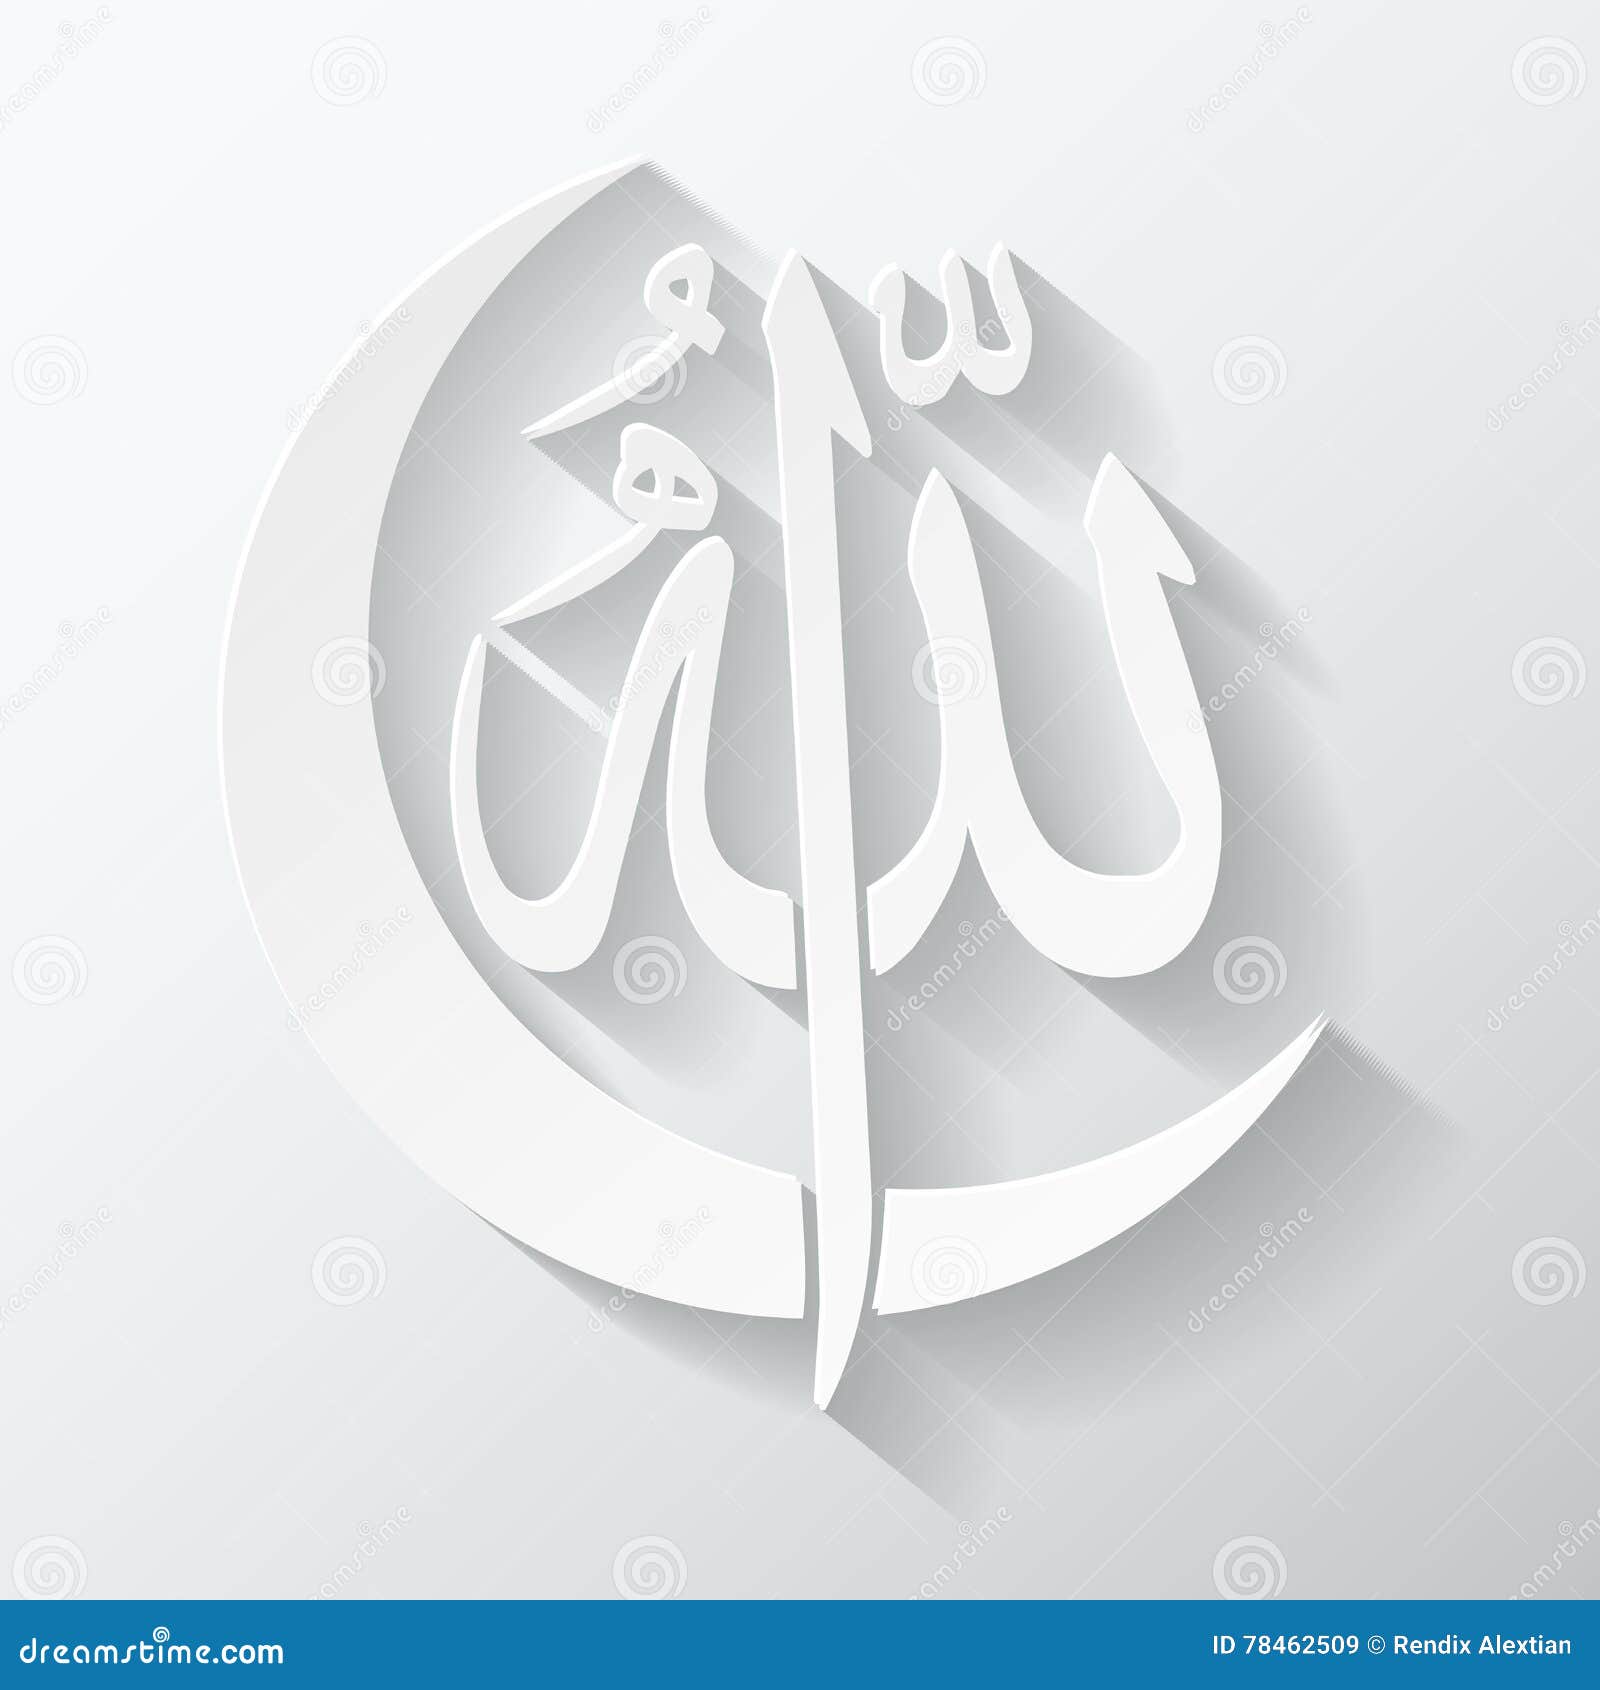 Allah in Arabic Calligraphy Writing with Crescent Moon - God Name ...